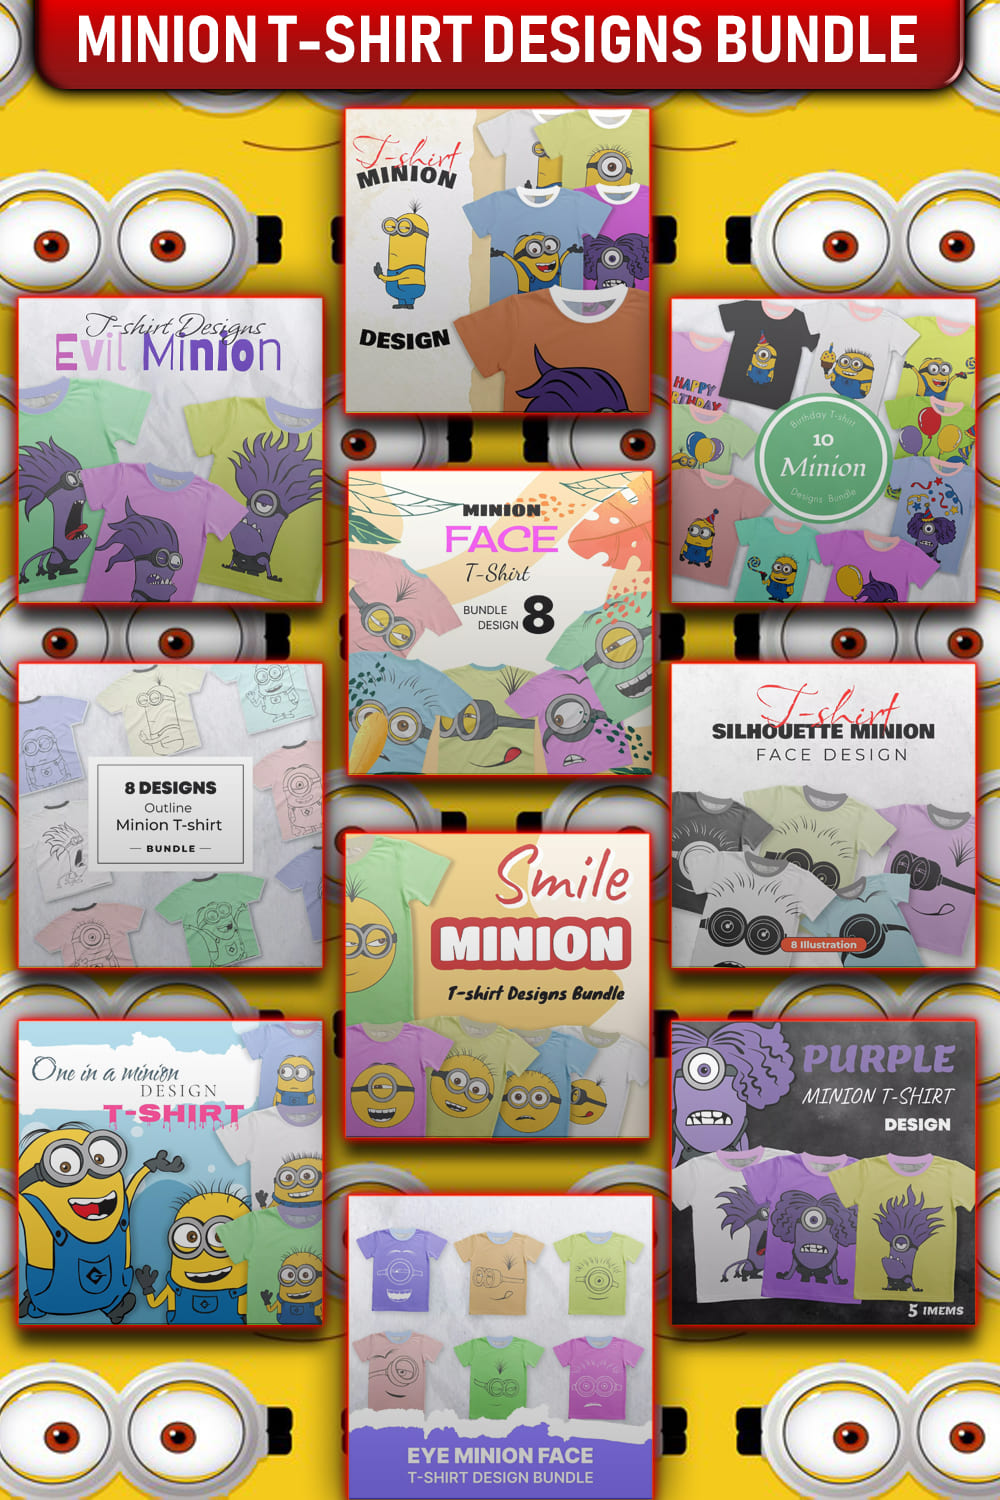 Bundle with enchanting images of covers with minions.